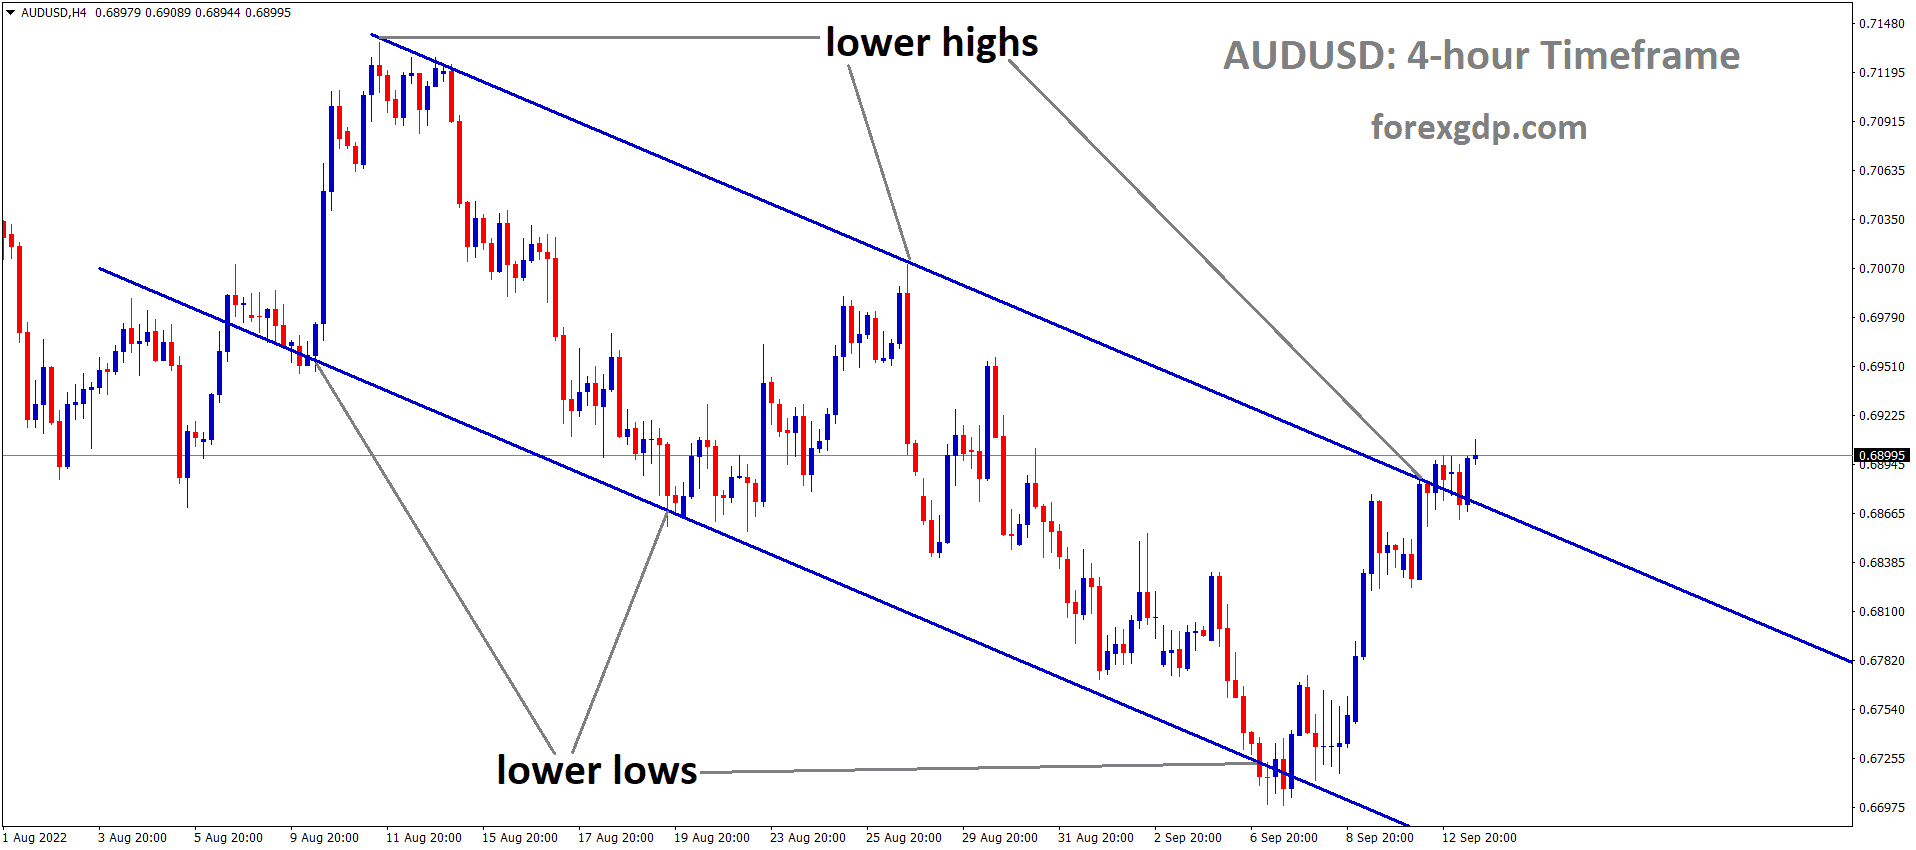 AUDUSD is moving in the Descending channel and the market has reached the lower high area of the channel 2